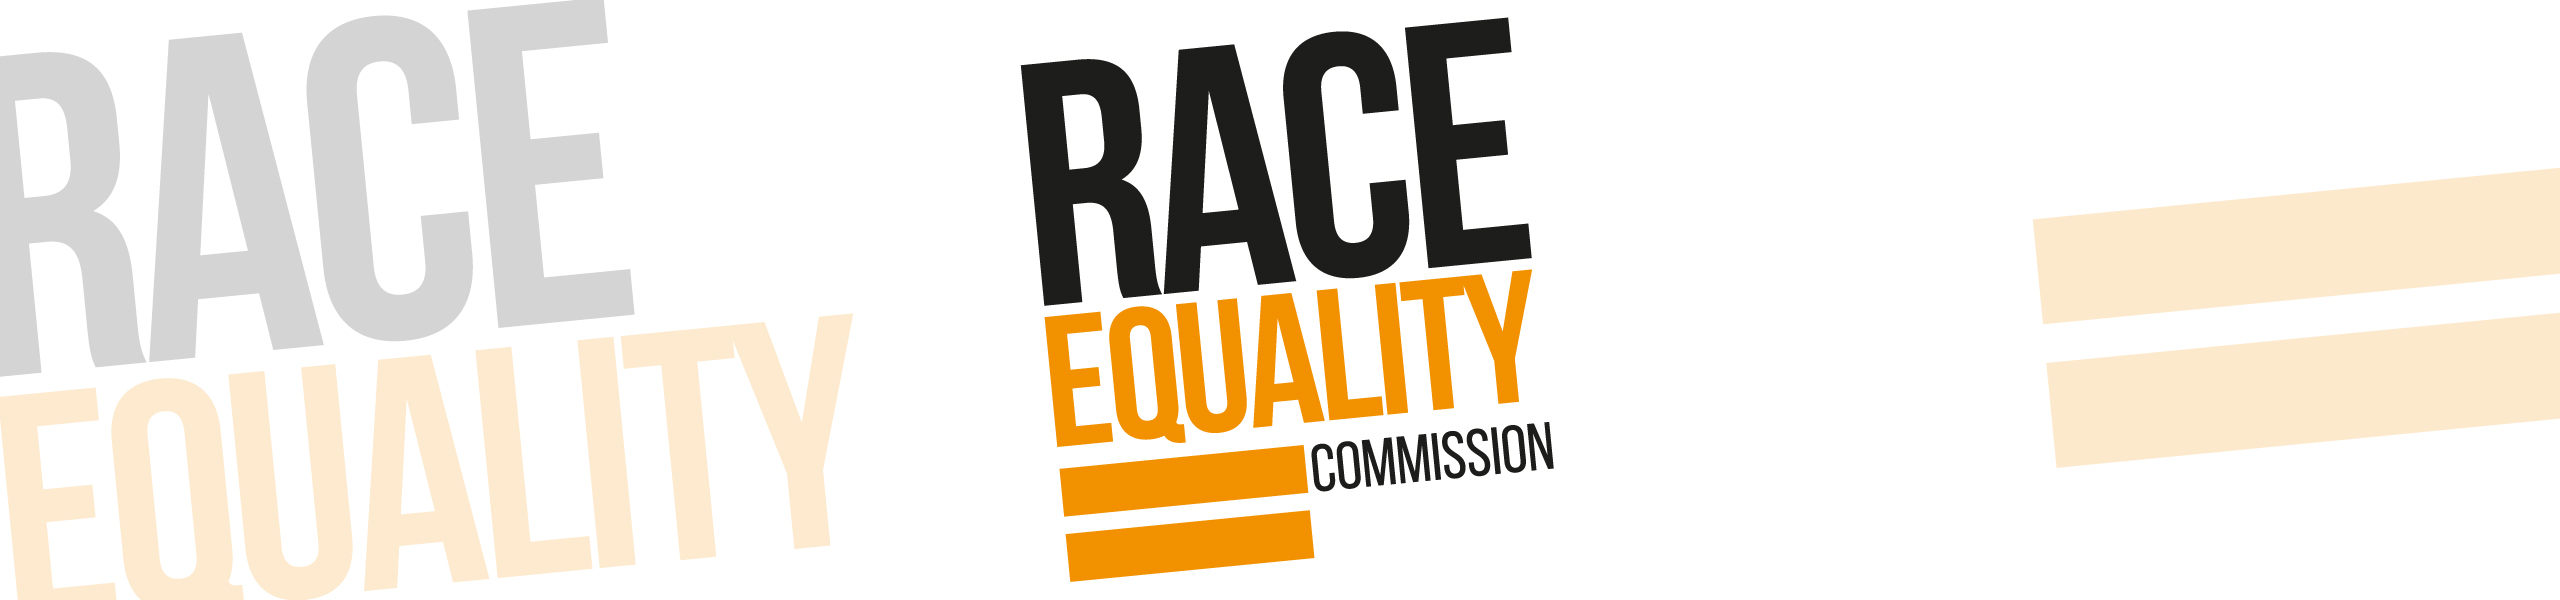 Race equality banner